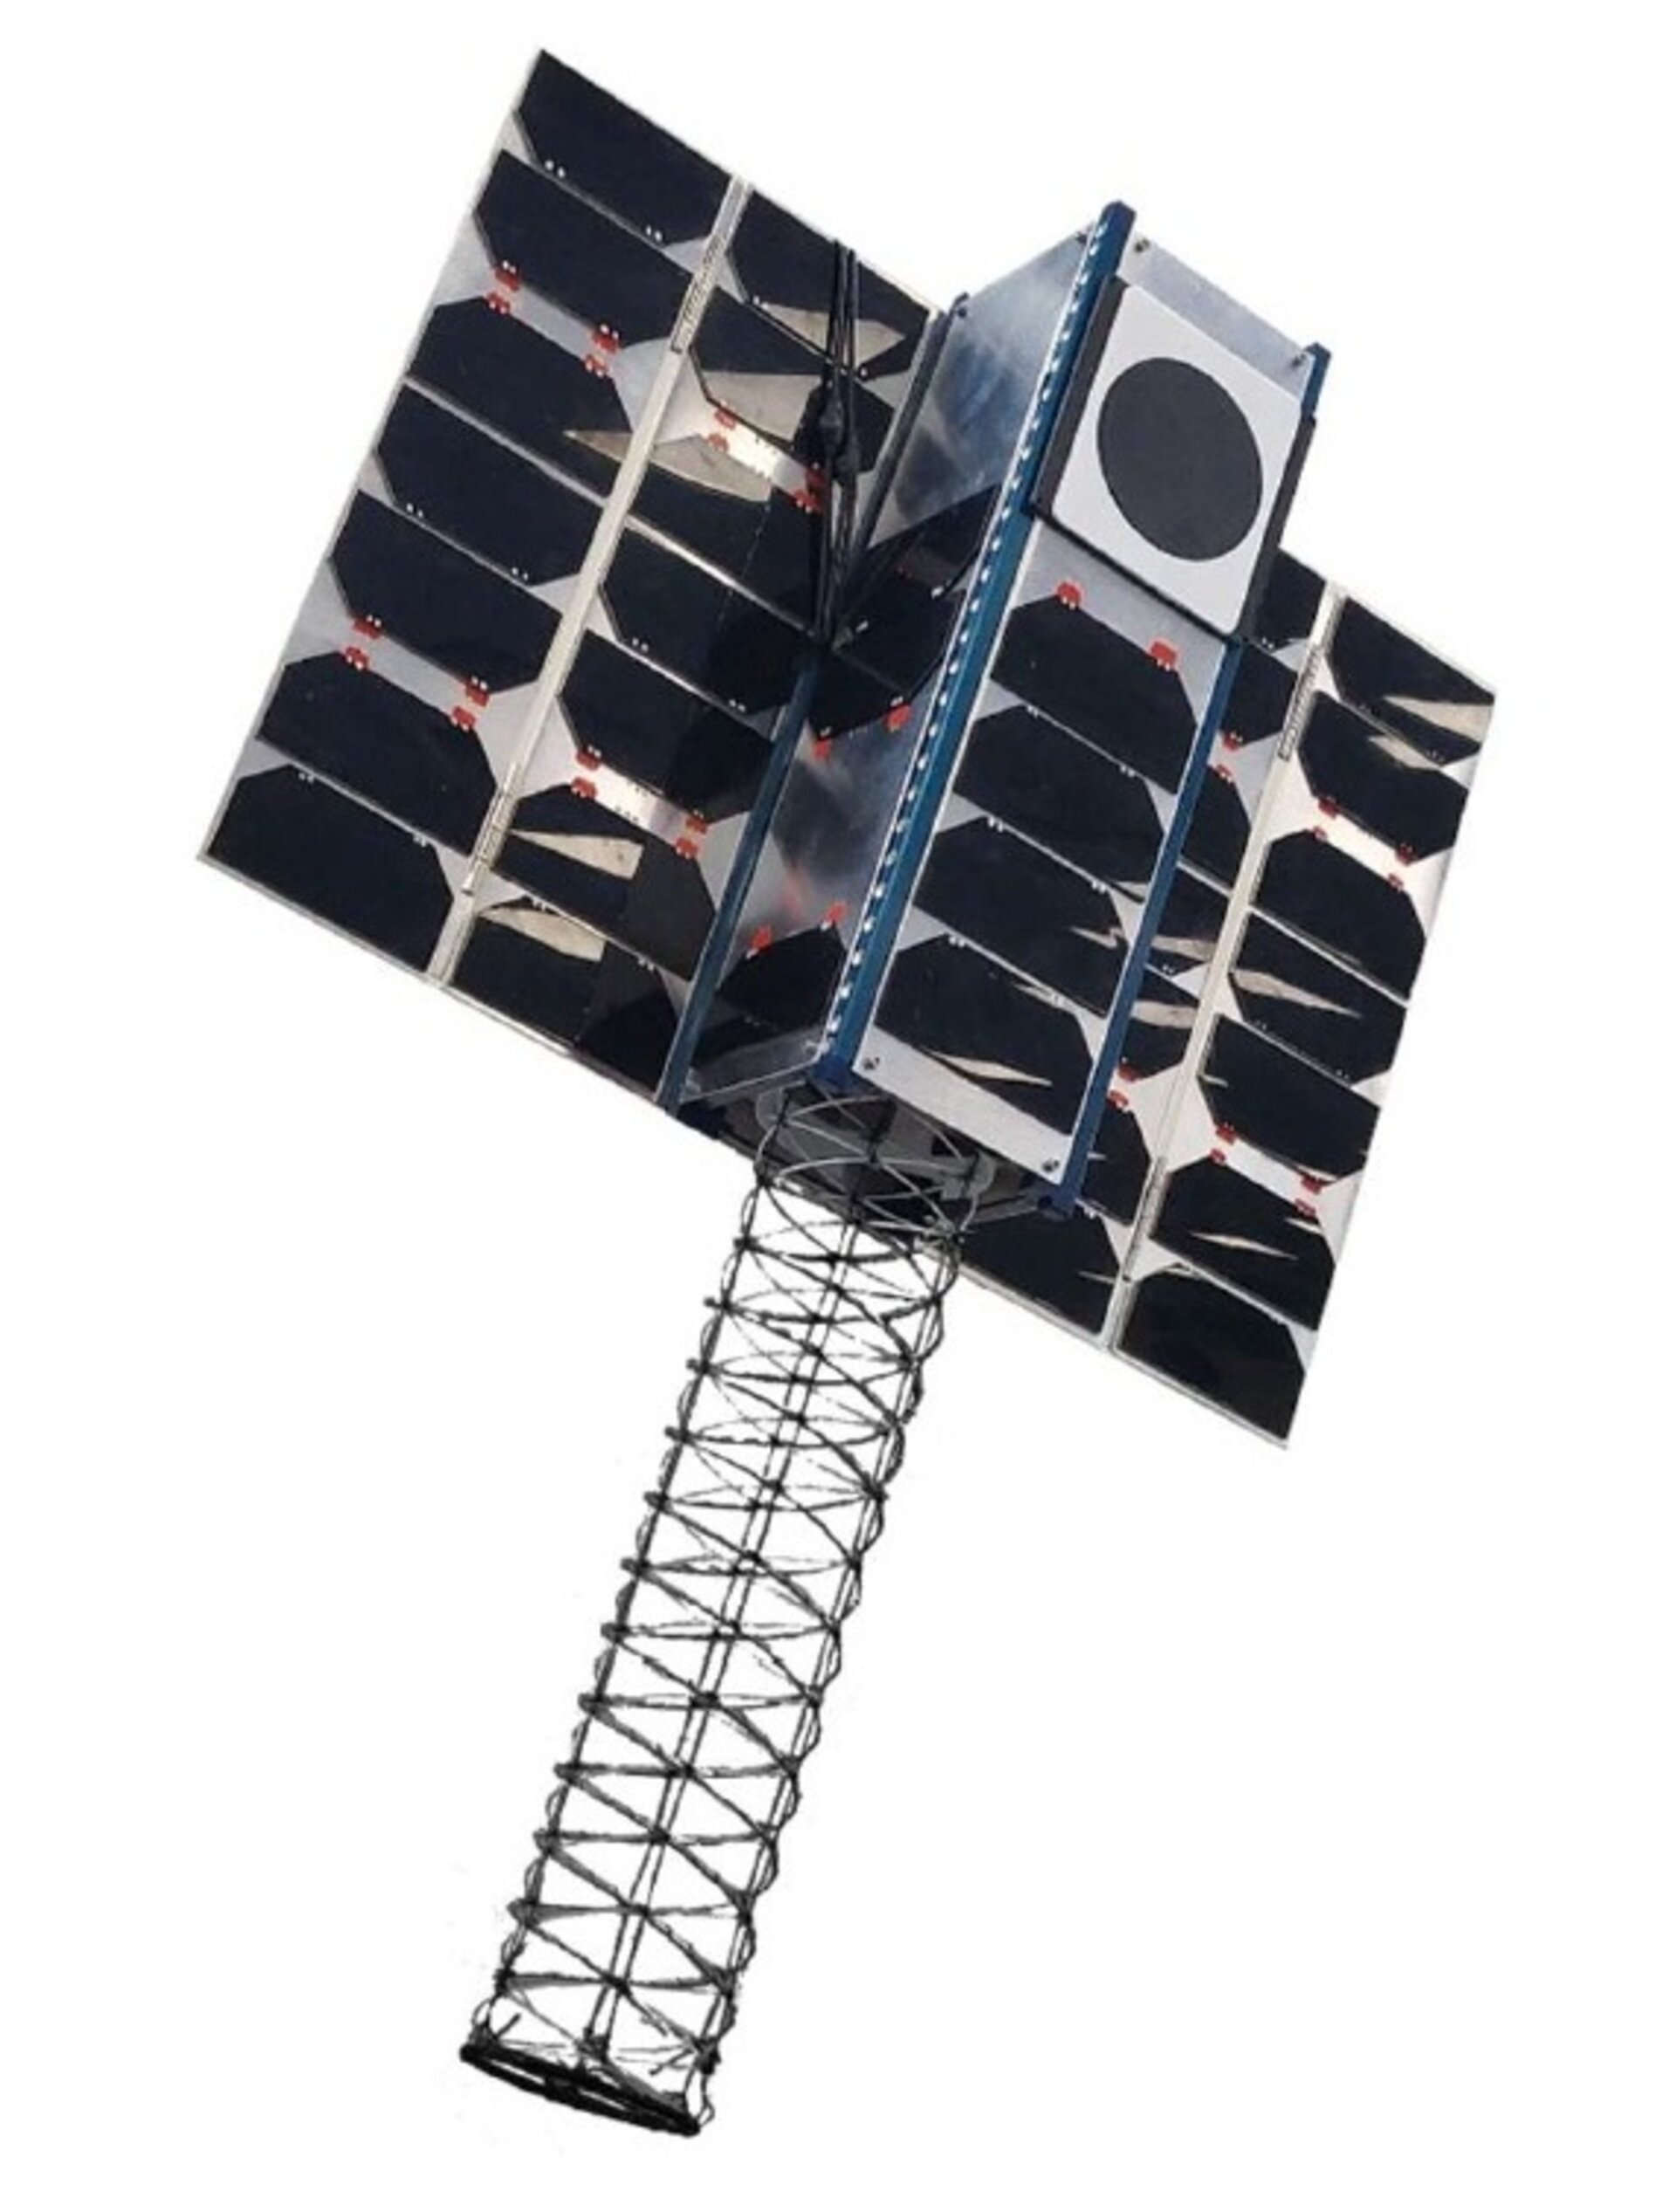 CubeSat with helical antenna